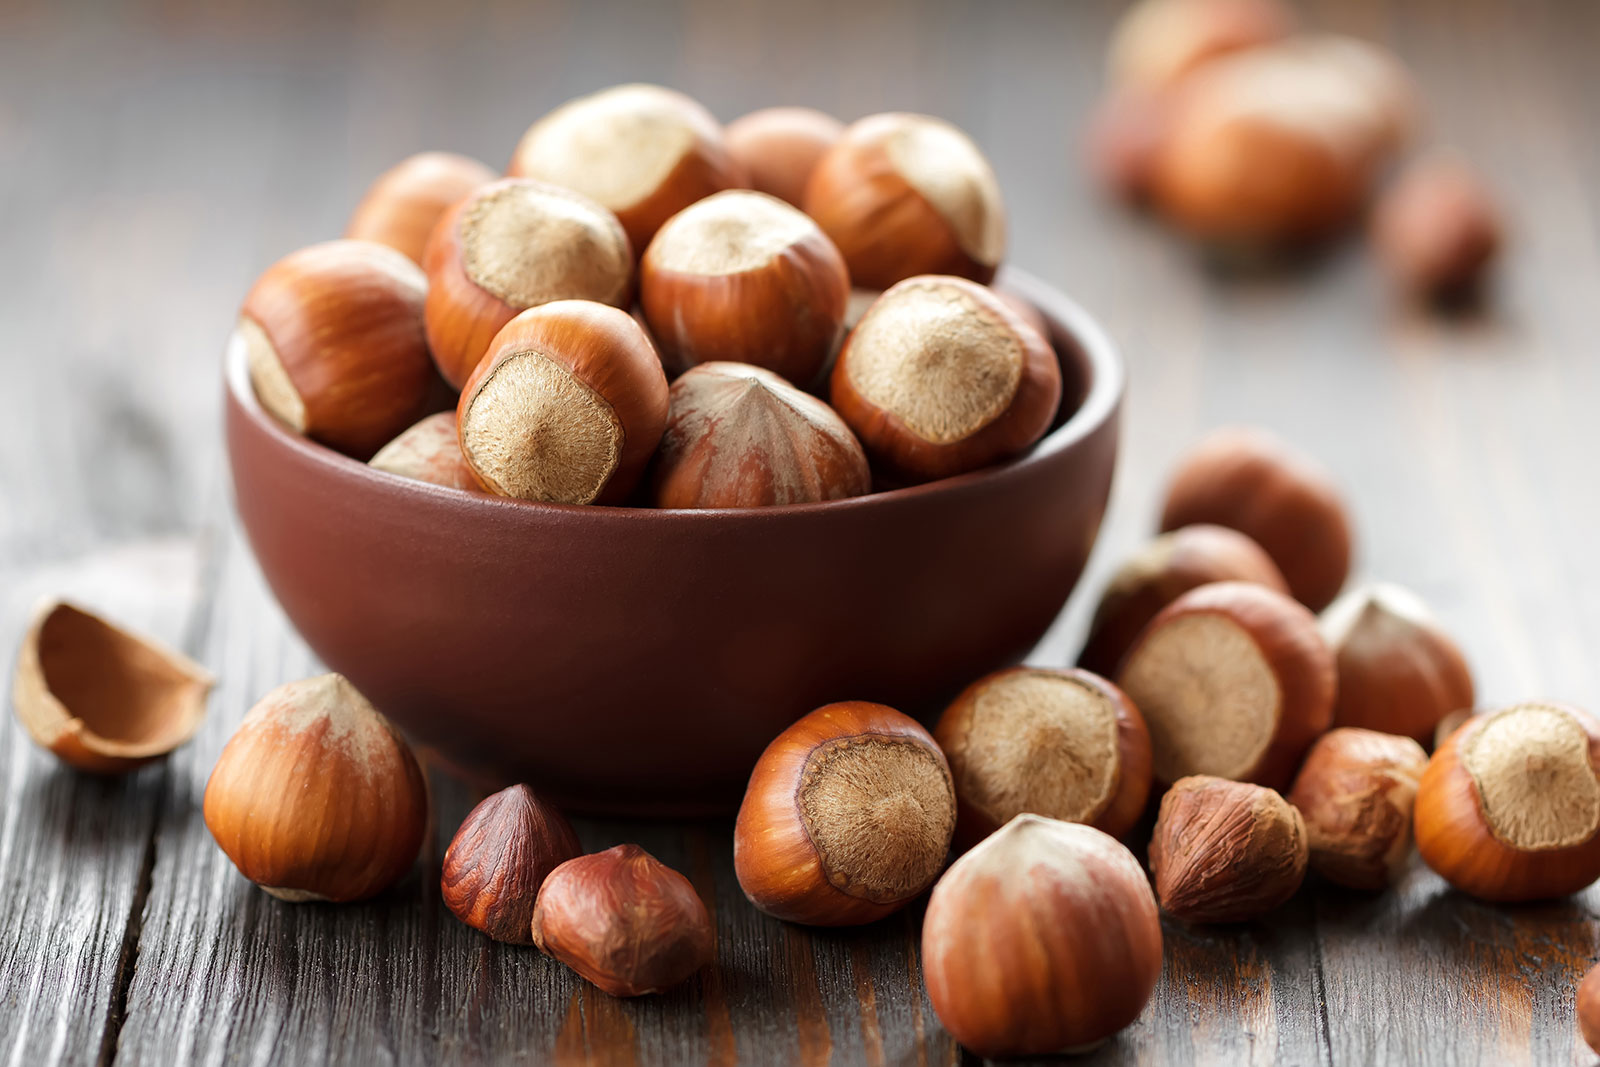 🥜 If You’ve Eaten 12/18 of These, You’re Nuts About Nuts Hazelnuts